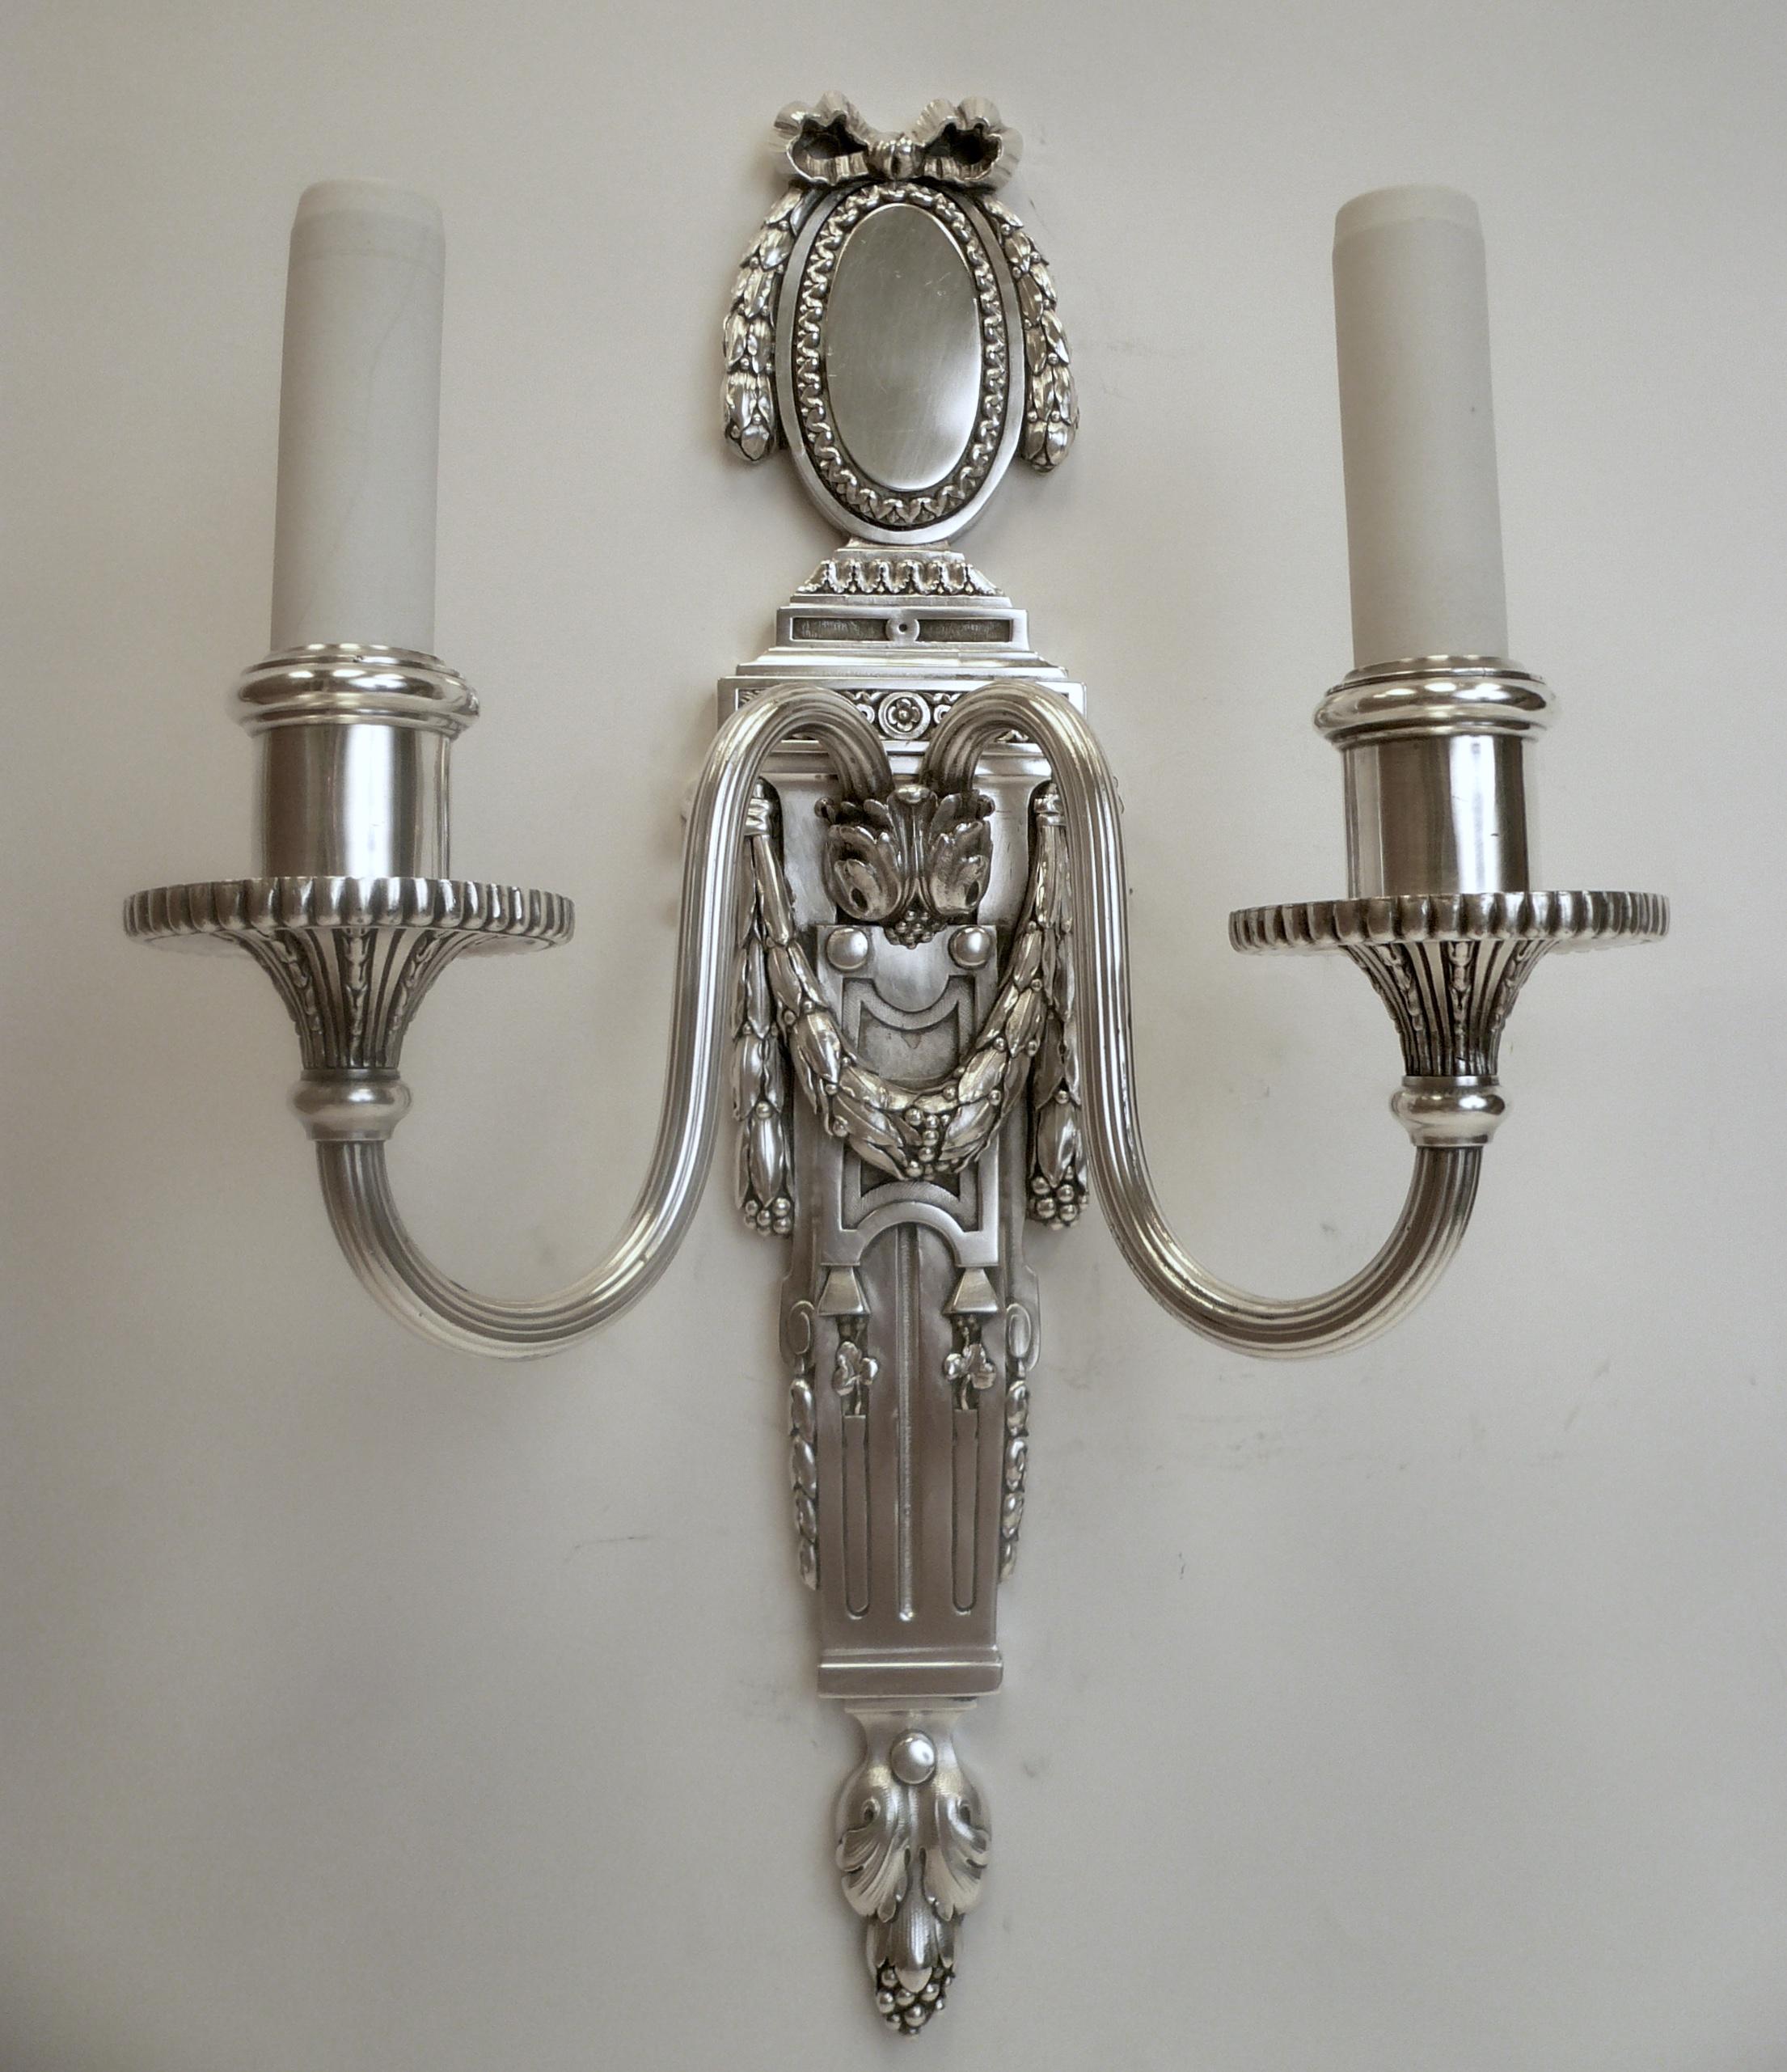 These handsome two light sconces in the Robert Adam style feature classical motifs including acanthus leaves, bowknots, and bellflowers.